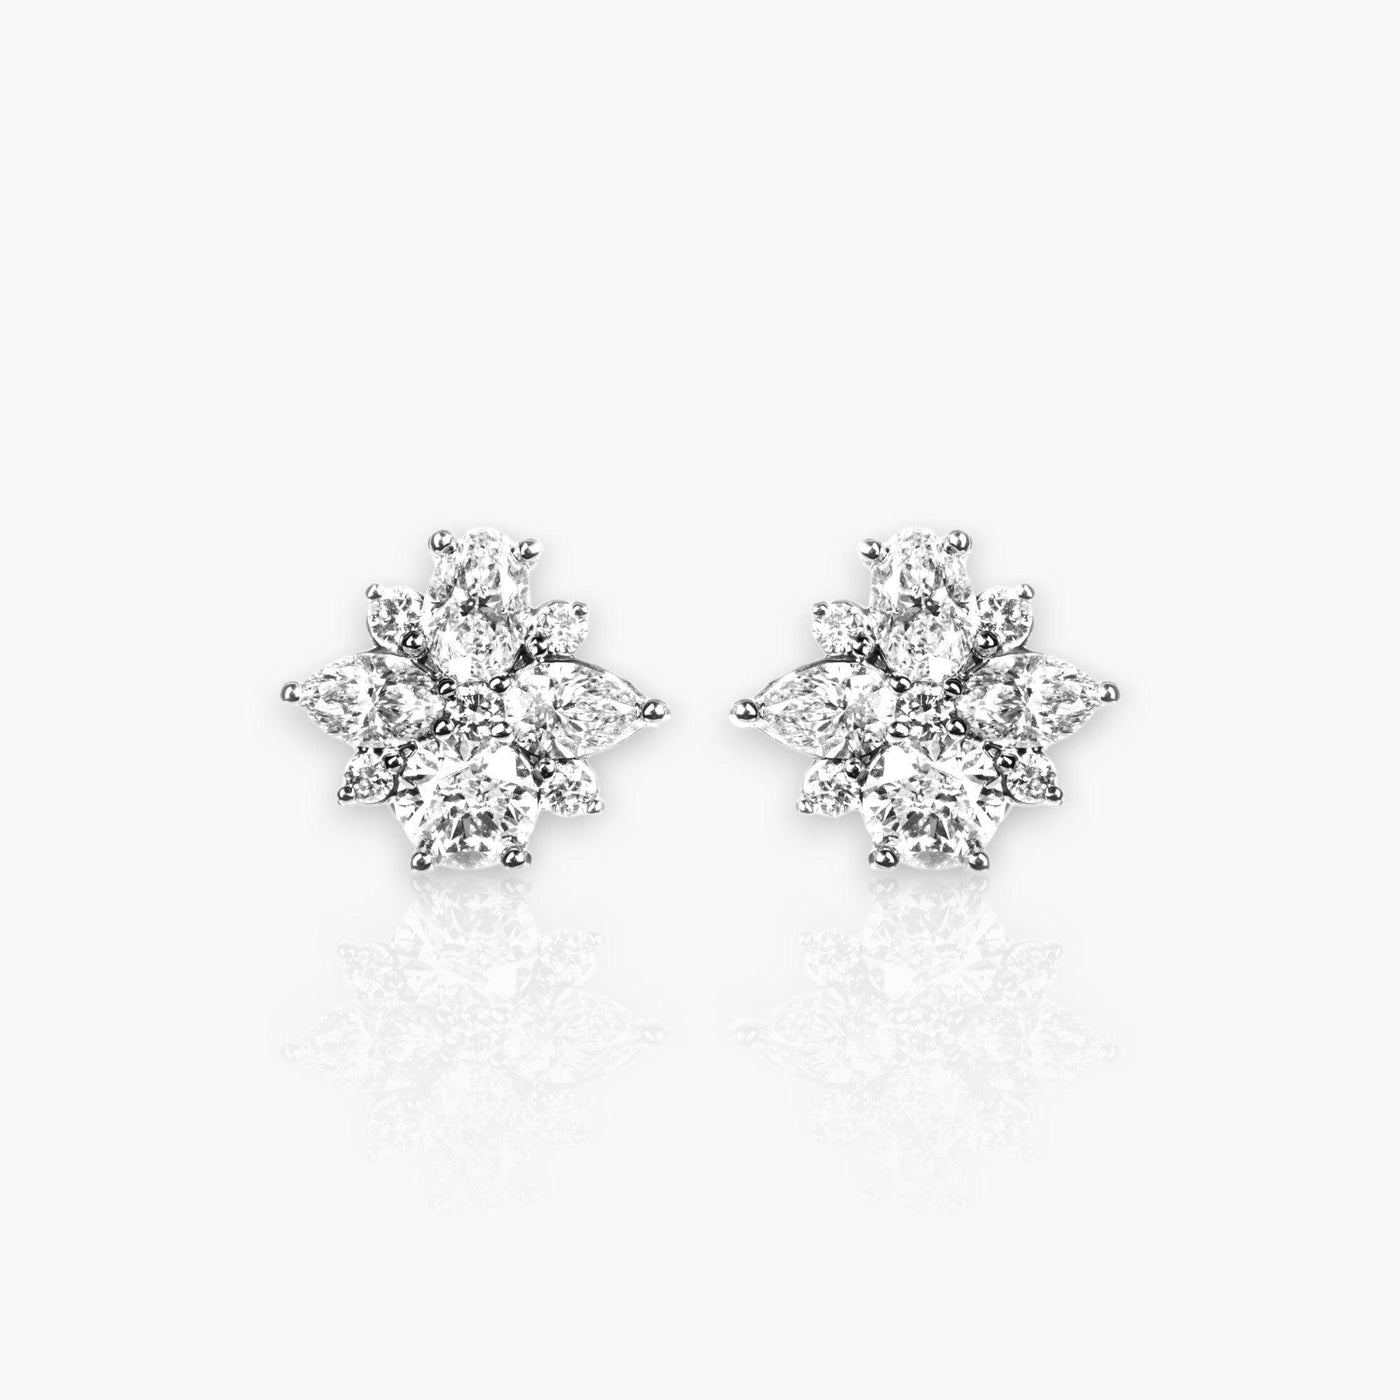 Orchid Earrings, White Gold and Diamonds - Moregola Fine Jewelry